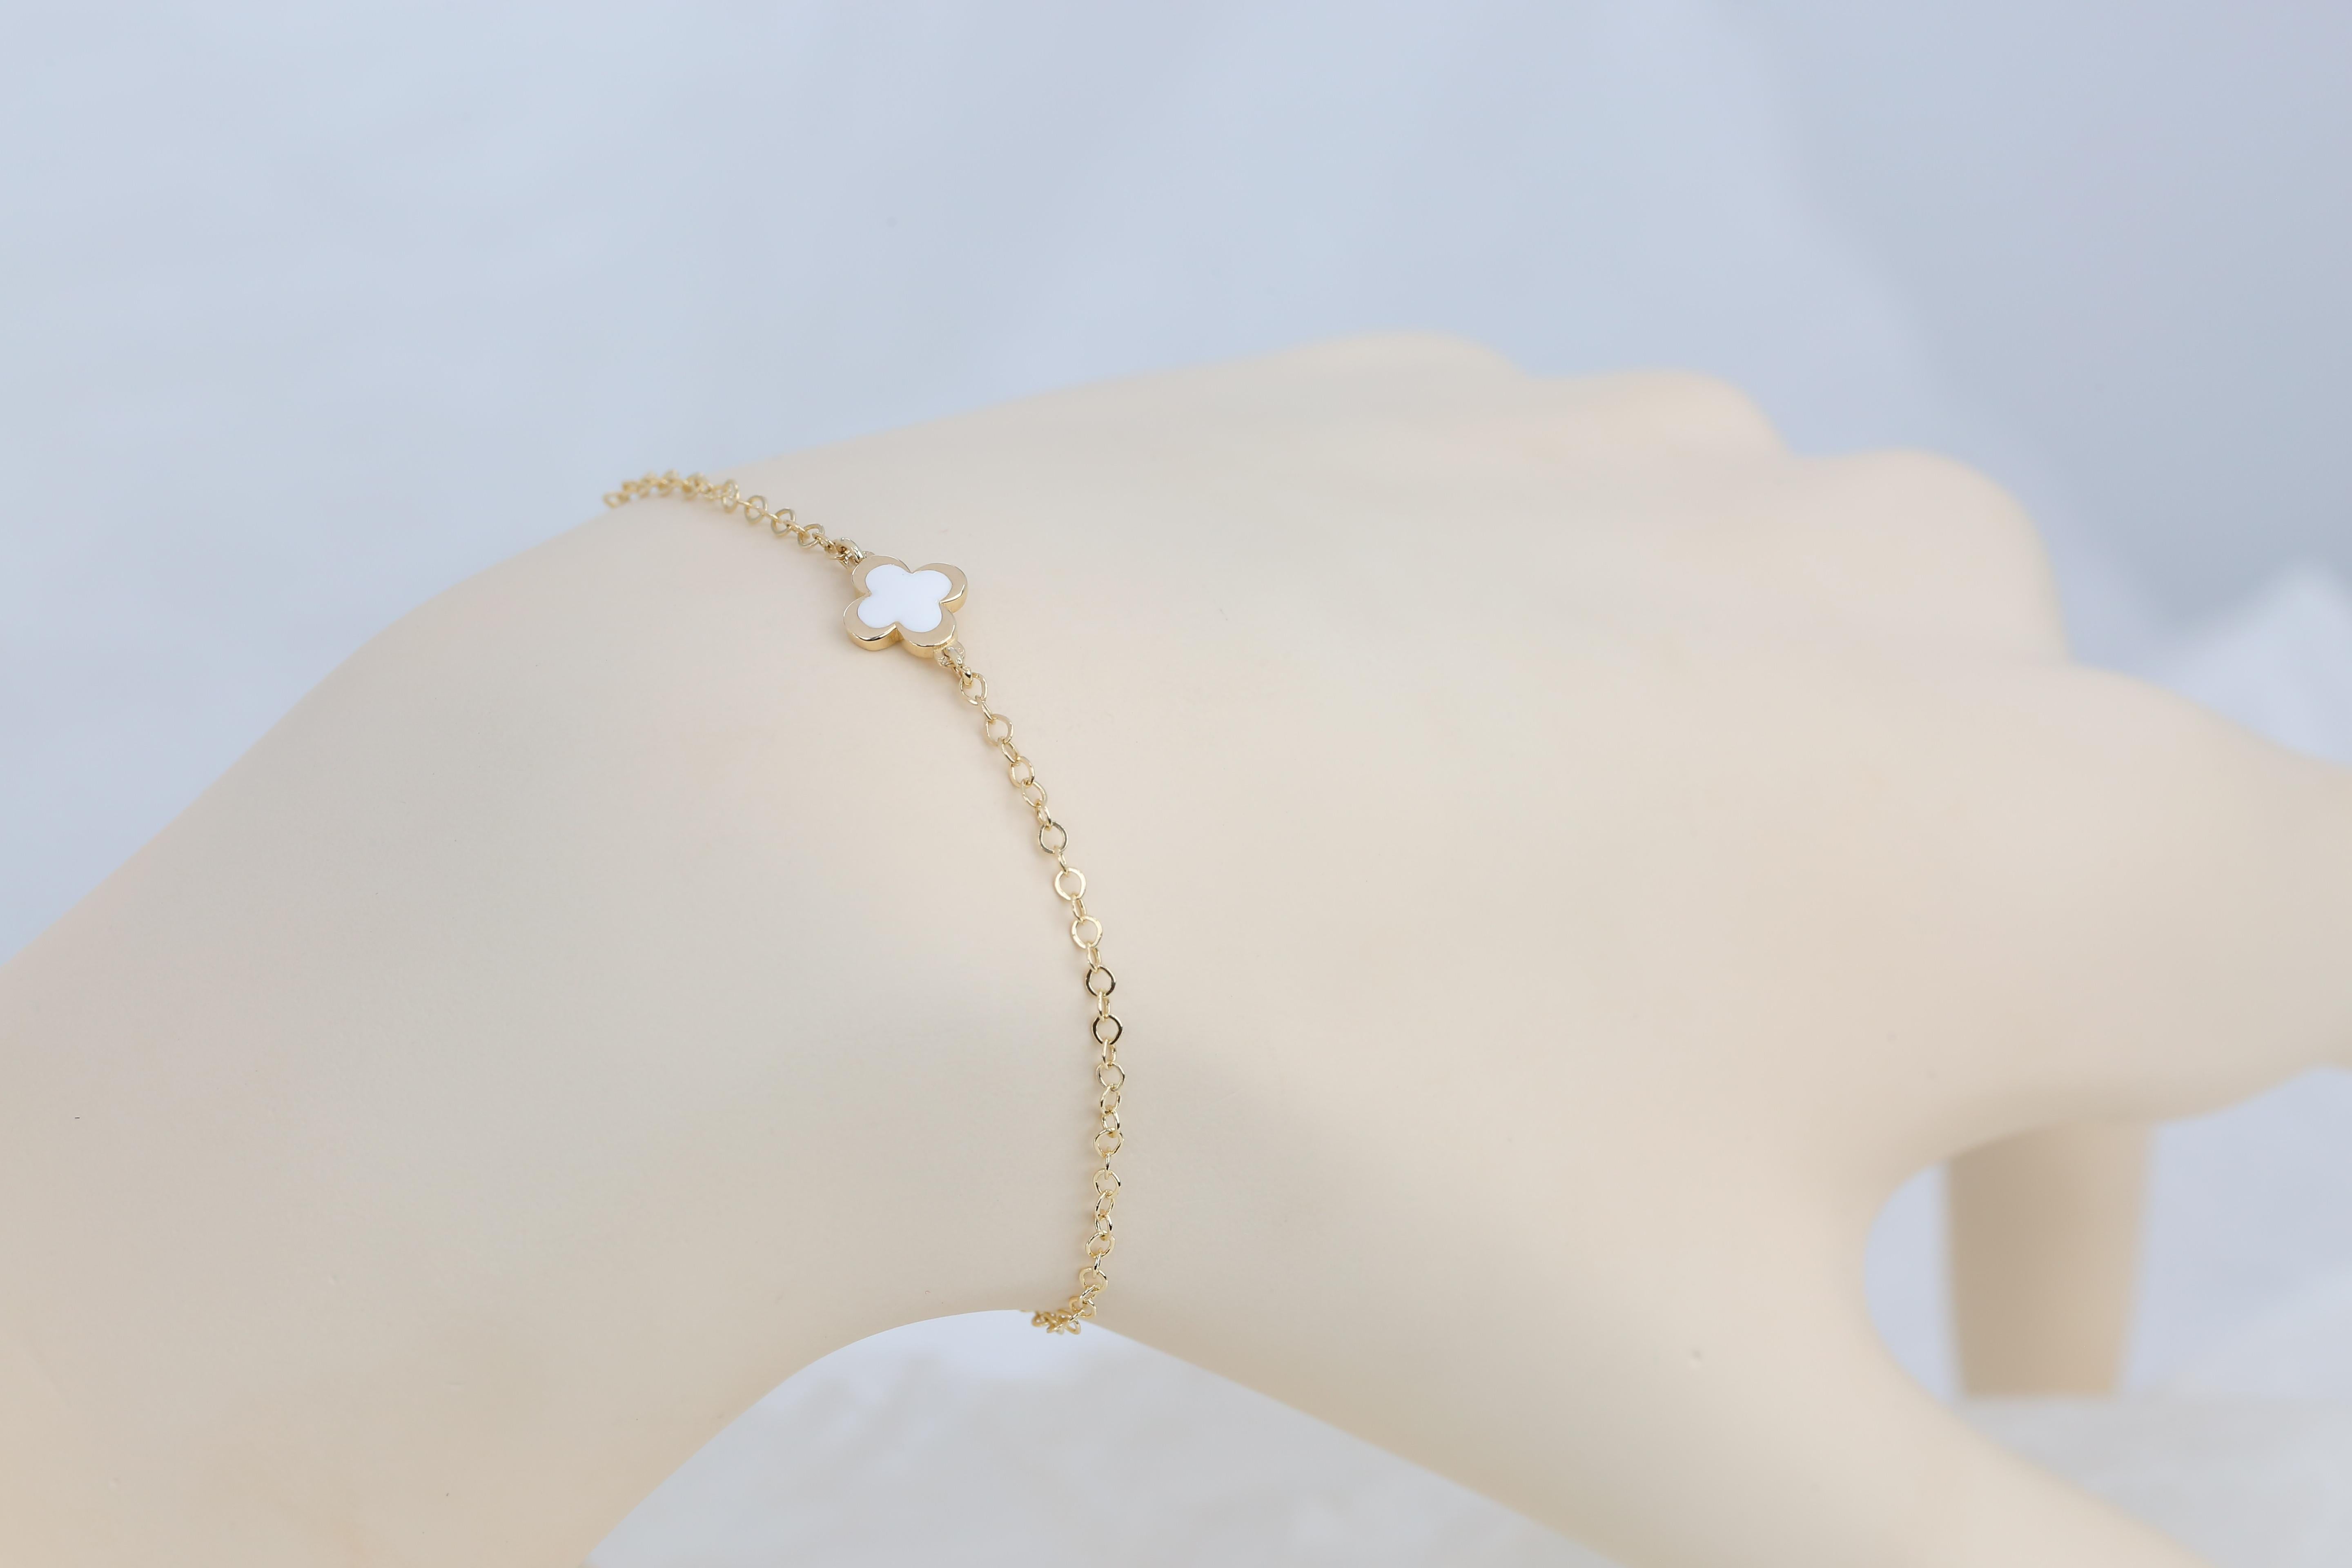 14K Gold White Enameled Clover Shaped Charm Dainty Bracelet
Made of 14 ct. solid gold.
With hallmark.

Total Weight: 1,1 gr.
Size: 18.0 cm

This piece was made with quality materials and excellent handwork. I guarantee the quality assurance of my